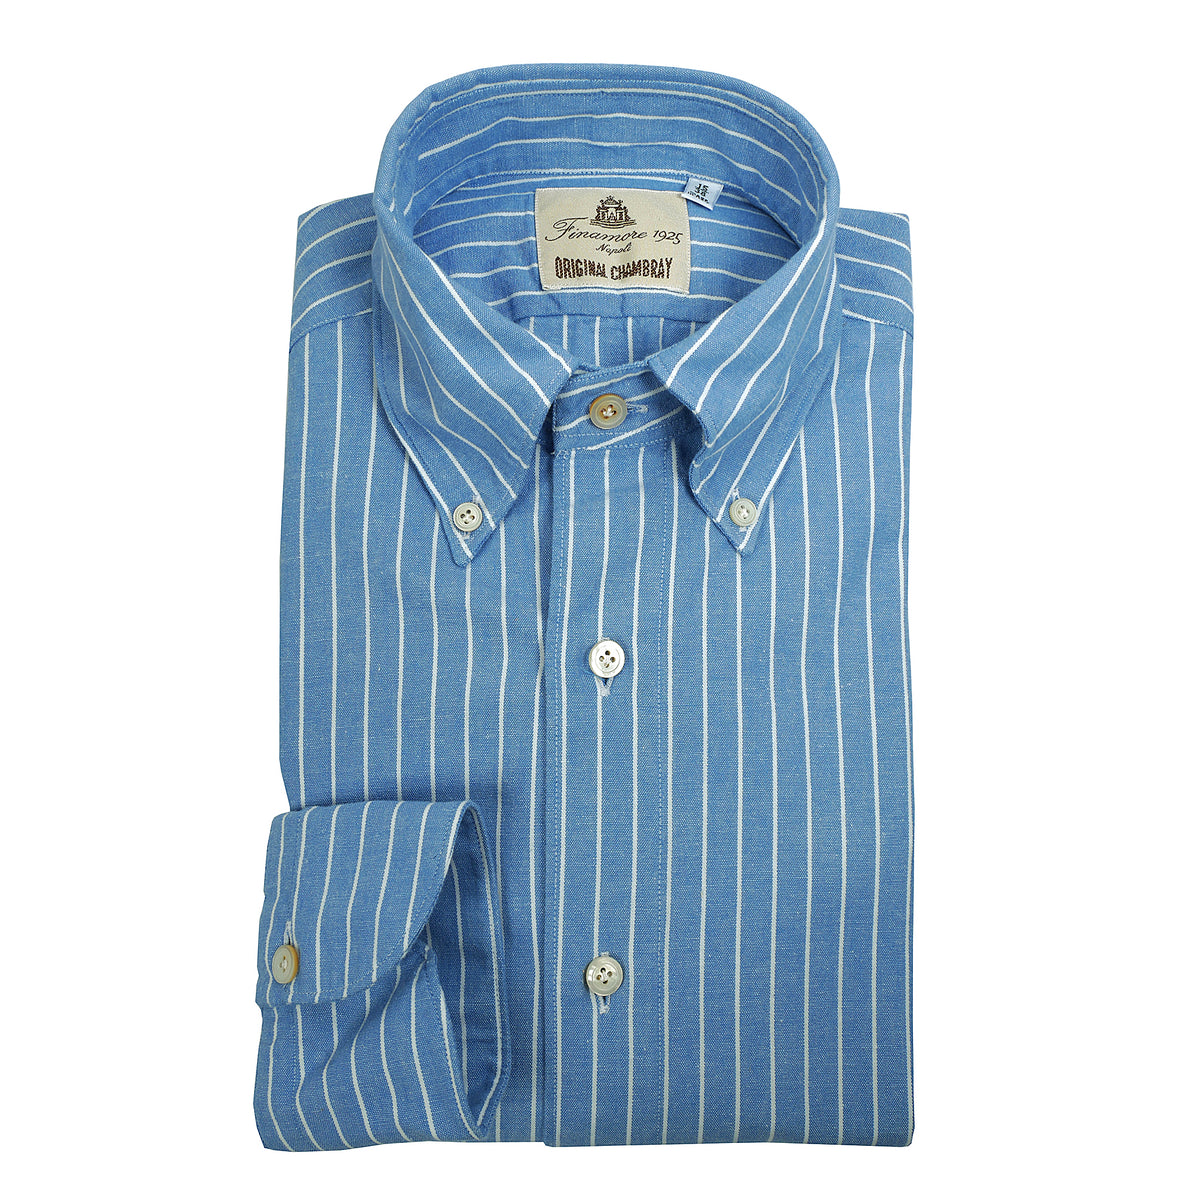 Sports shirt button-down tokyo in blue pinstriped chambray Finamore 1925